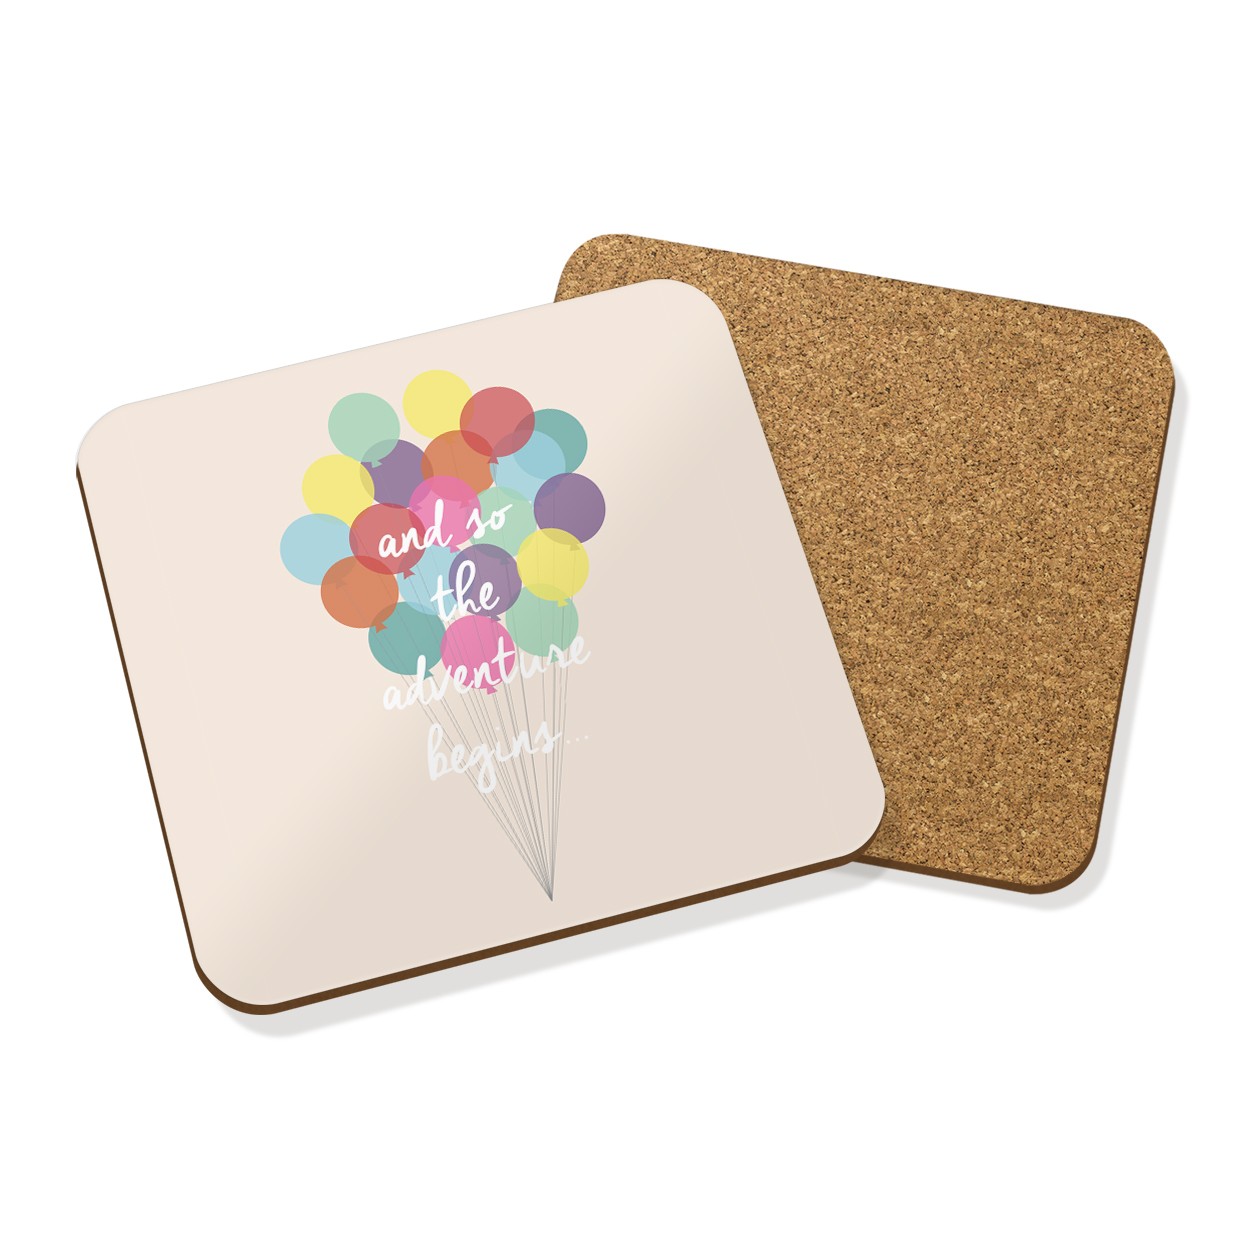 AND SO THE ADVENTURE BEGINS QUOTE DRINKS COASTER MAT CORK SQUARE